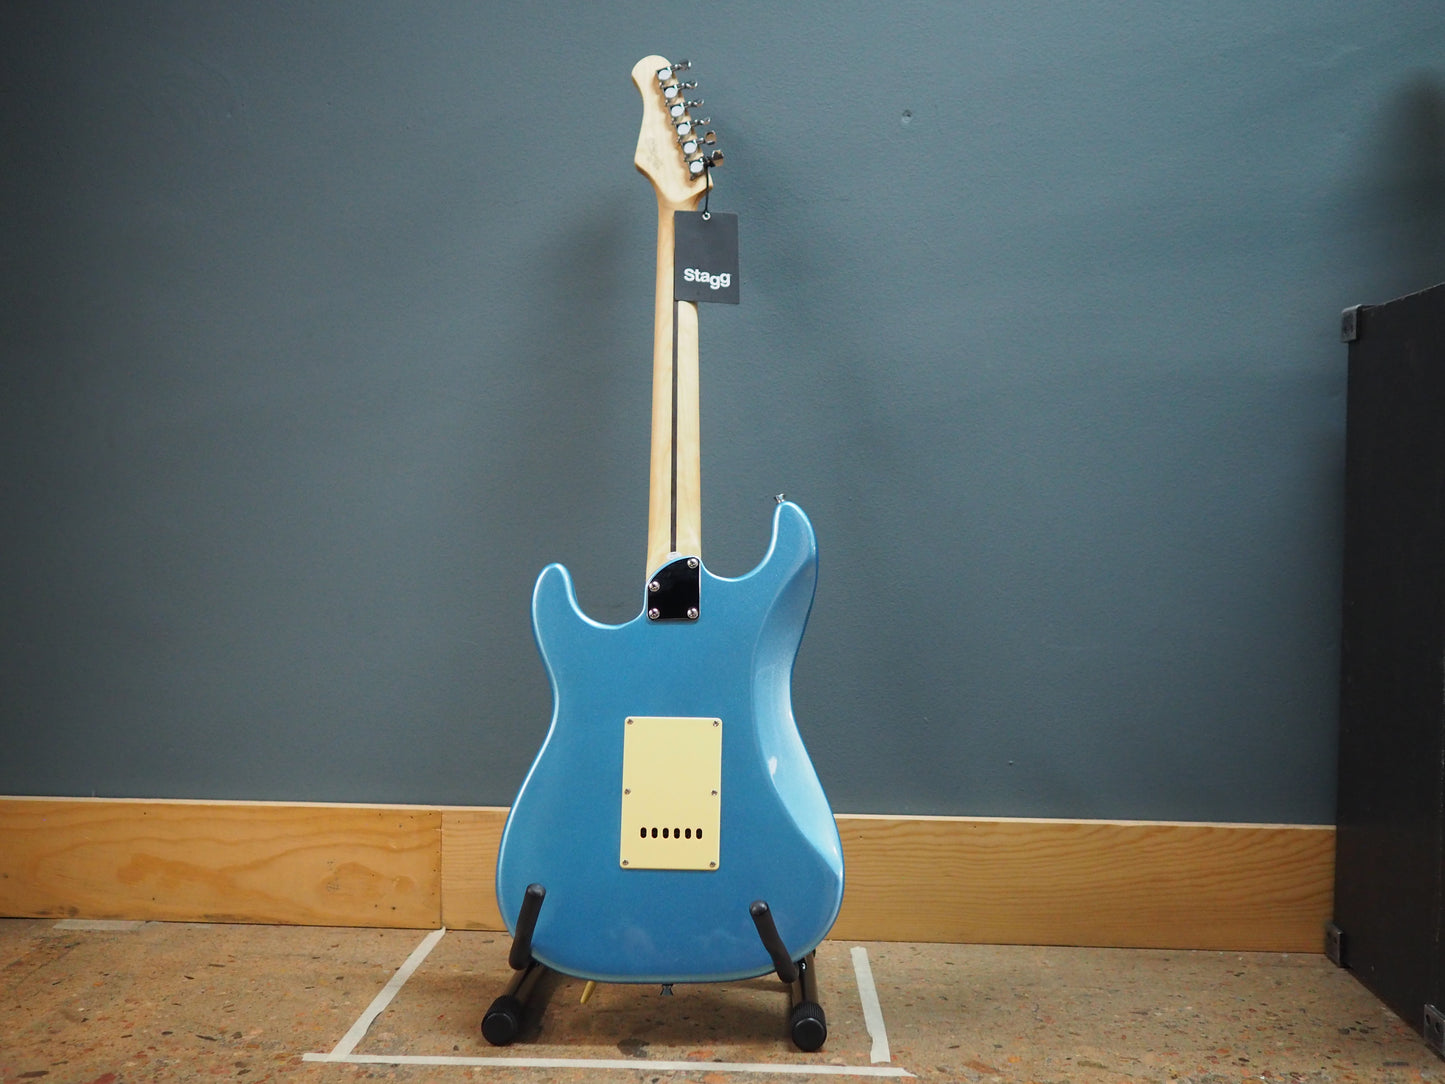 Stagg SES-30 Electric Guitar (Icy Blue)